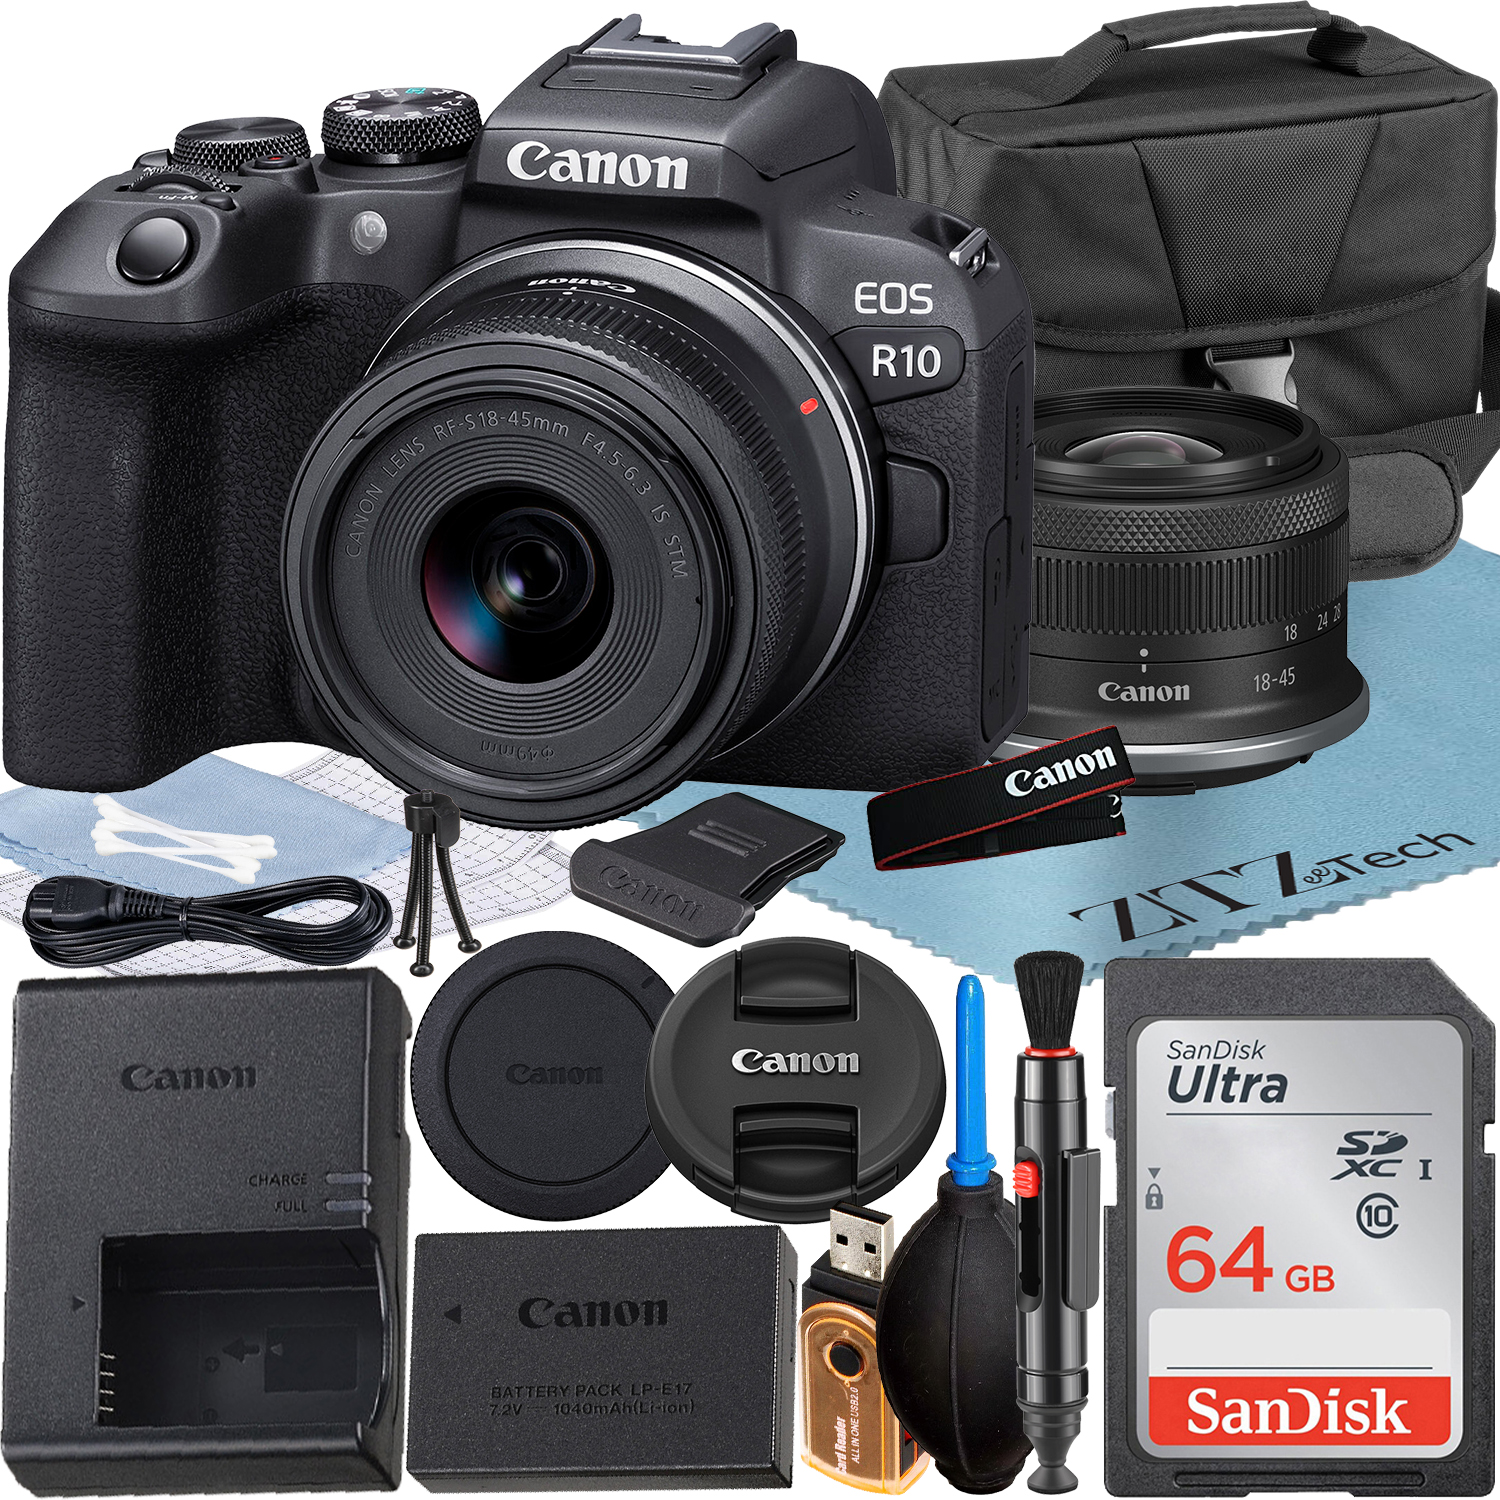 Canon EOS R10 Mirrorless Camera with RF-S 18-45mm Lens + SanDisk 64GB Memory Card + Case + ZeeTech Accessory Bundle